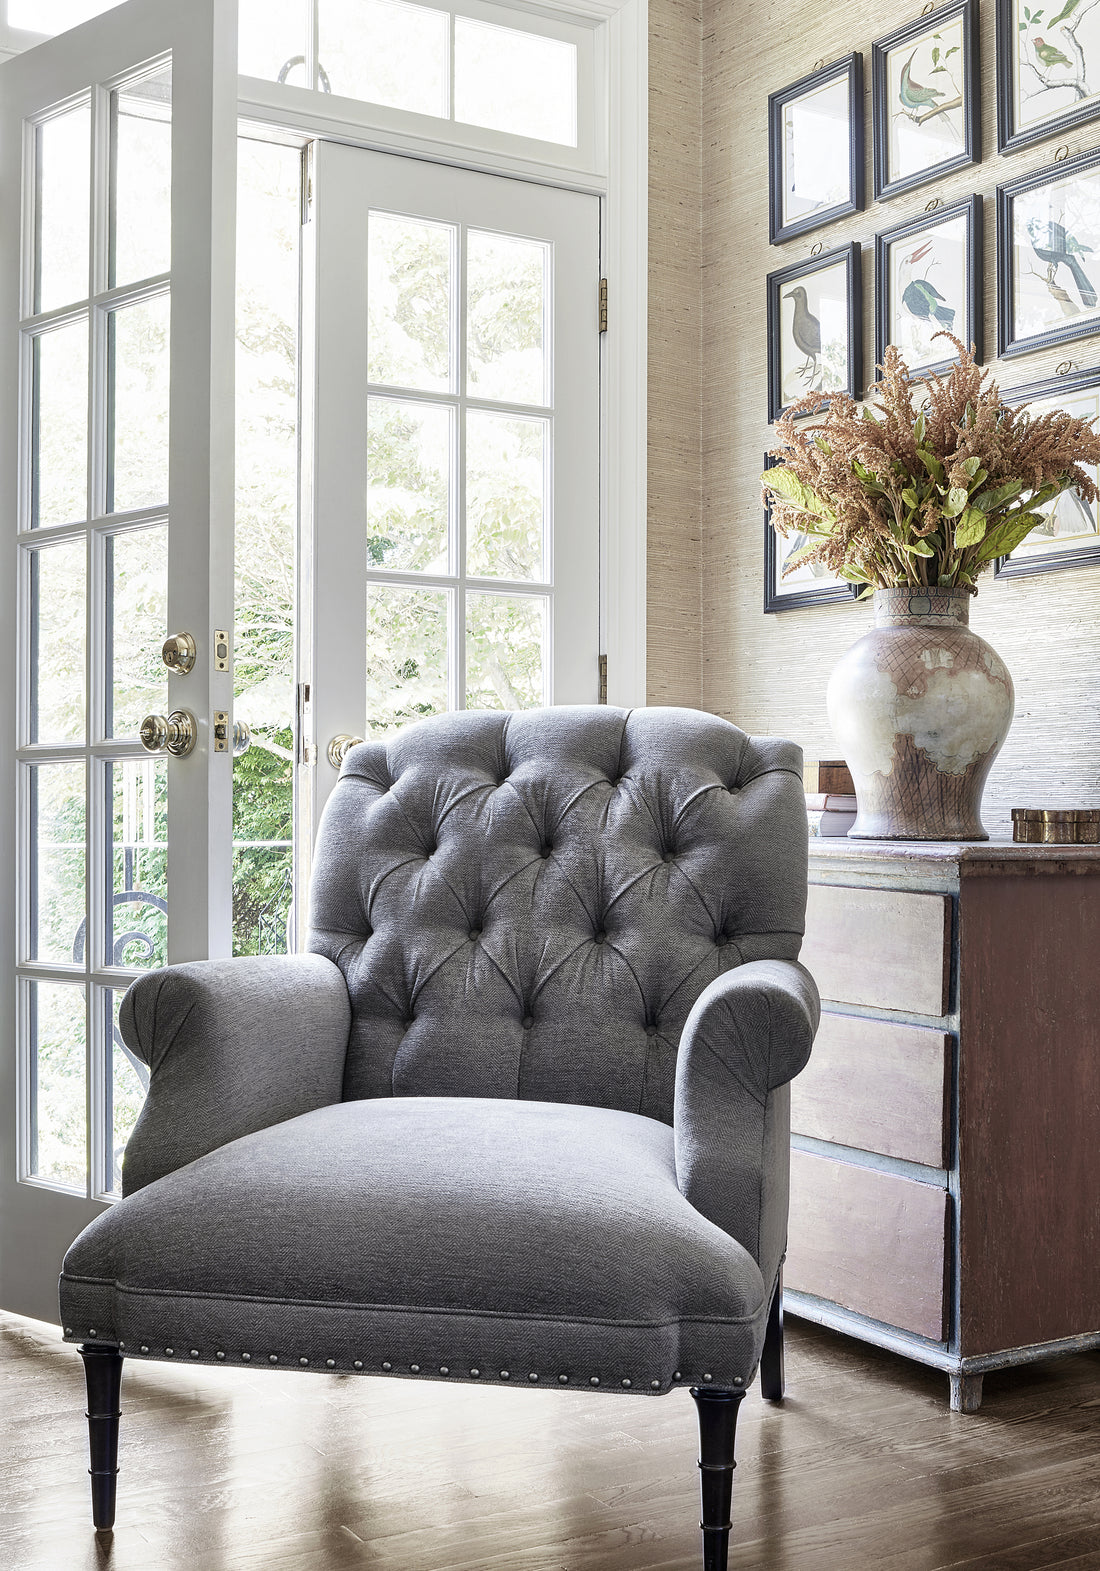 Cheverly Chair in Bronwyn Herringbone woven fabric in charcoal color - pattern number W80685 by Thibaut in the Pinnacle collection